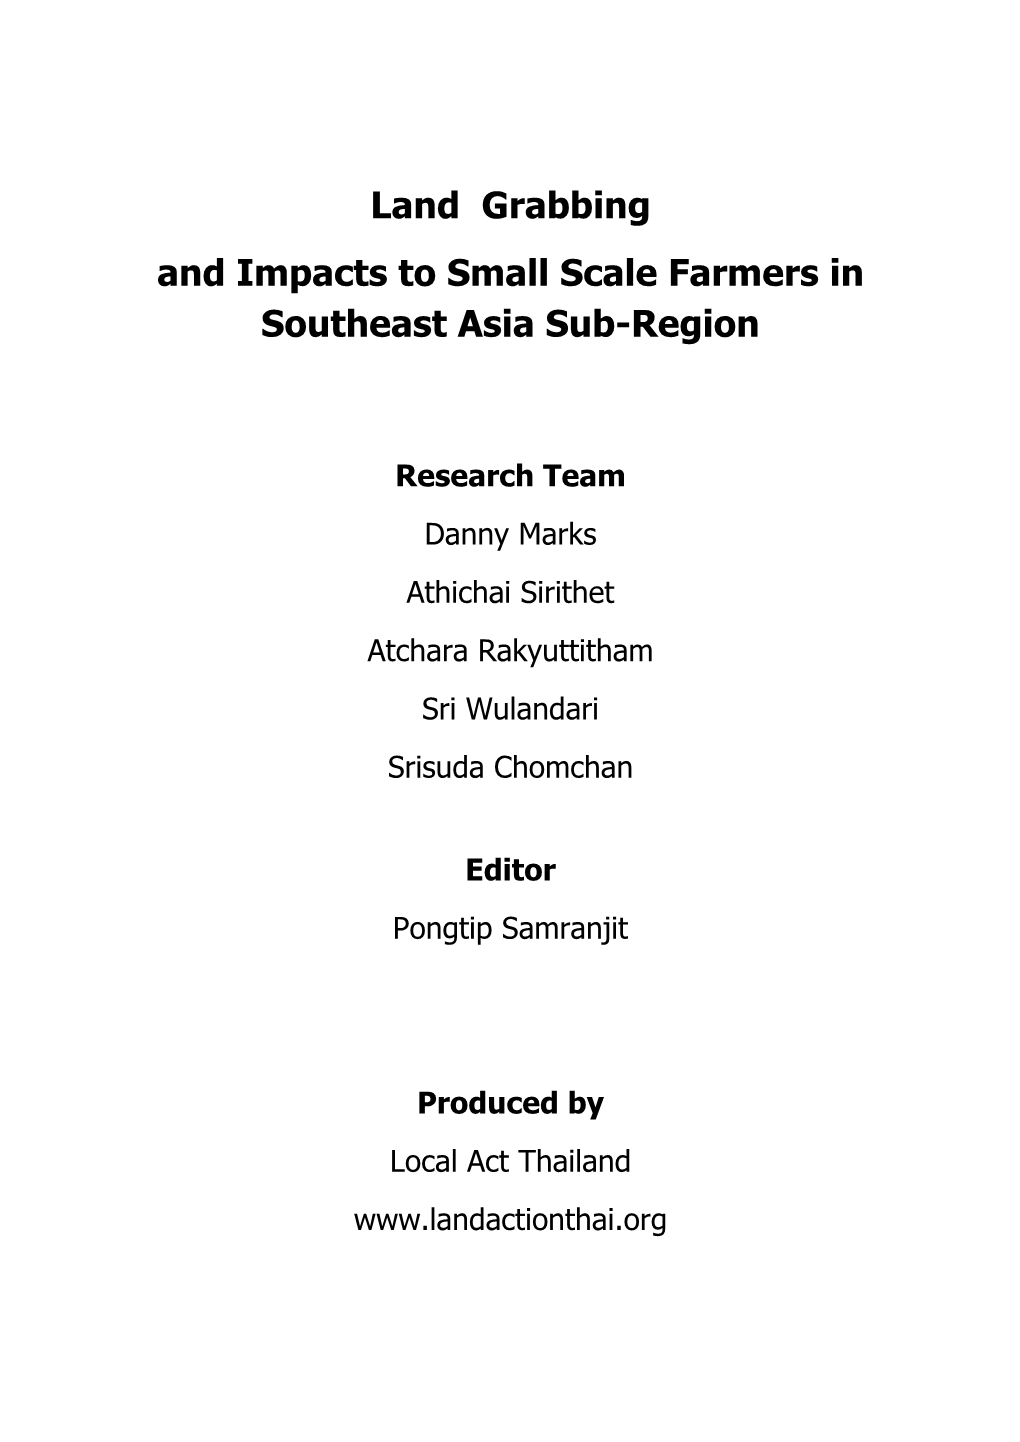 Land Grabbing and Impacts to Small Scale Farmers in Southeast Asia Sub-Region